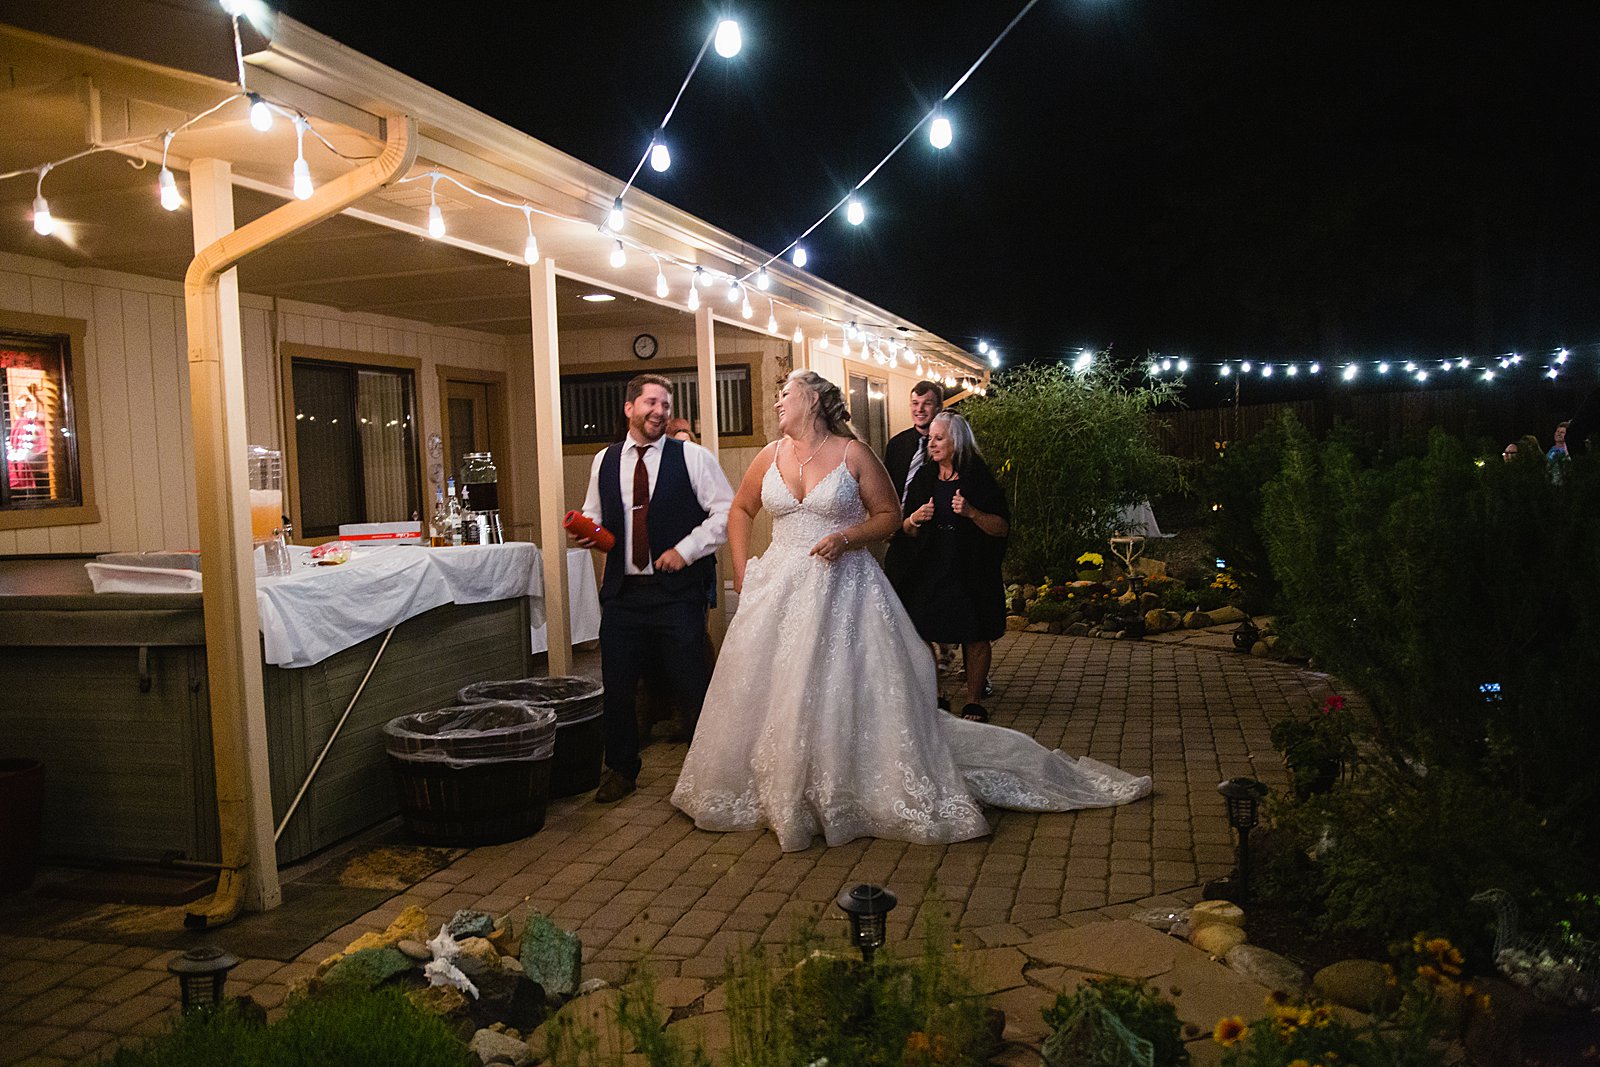 Bride and Groom dancing with guests at their backyard wedding reception by Arizona wedding photographer PMA Photography